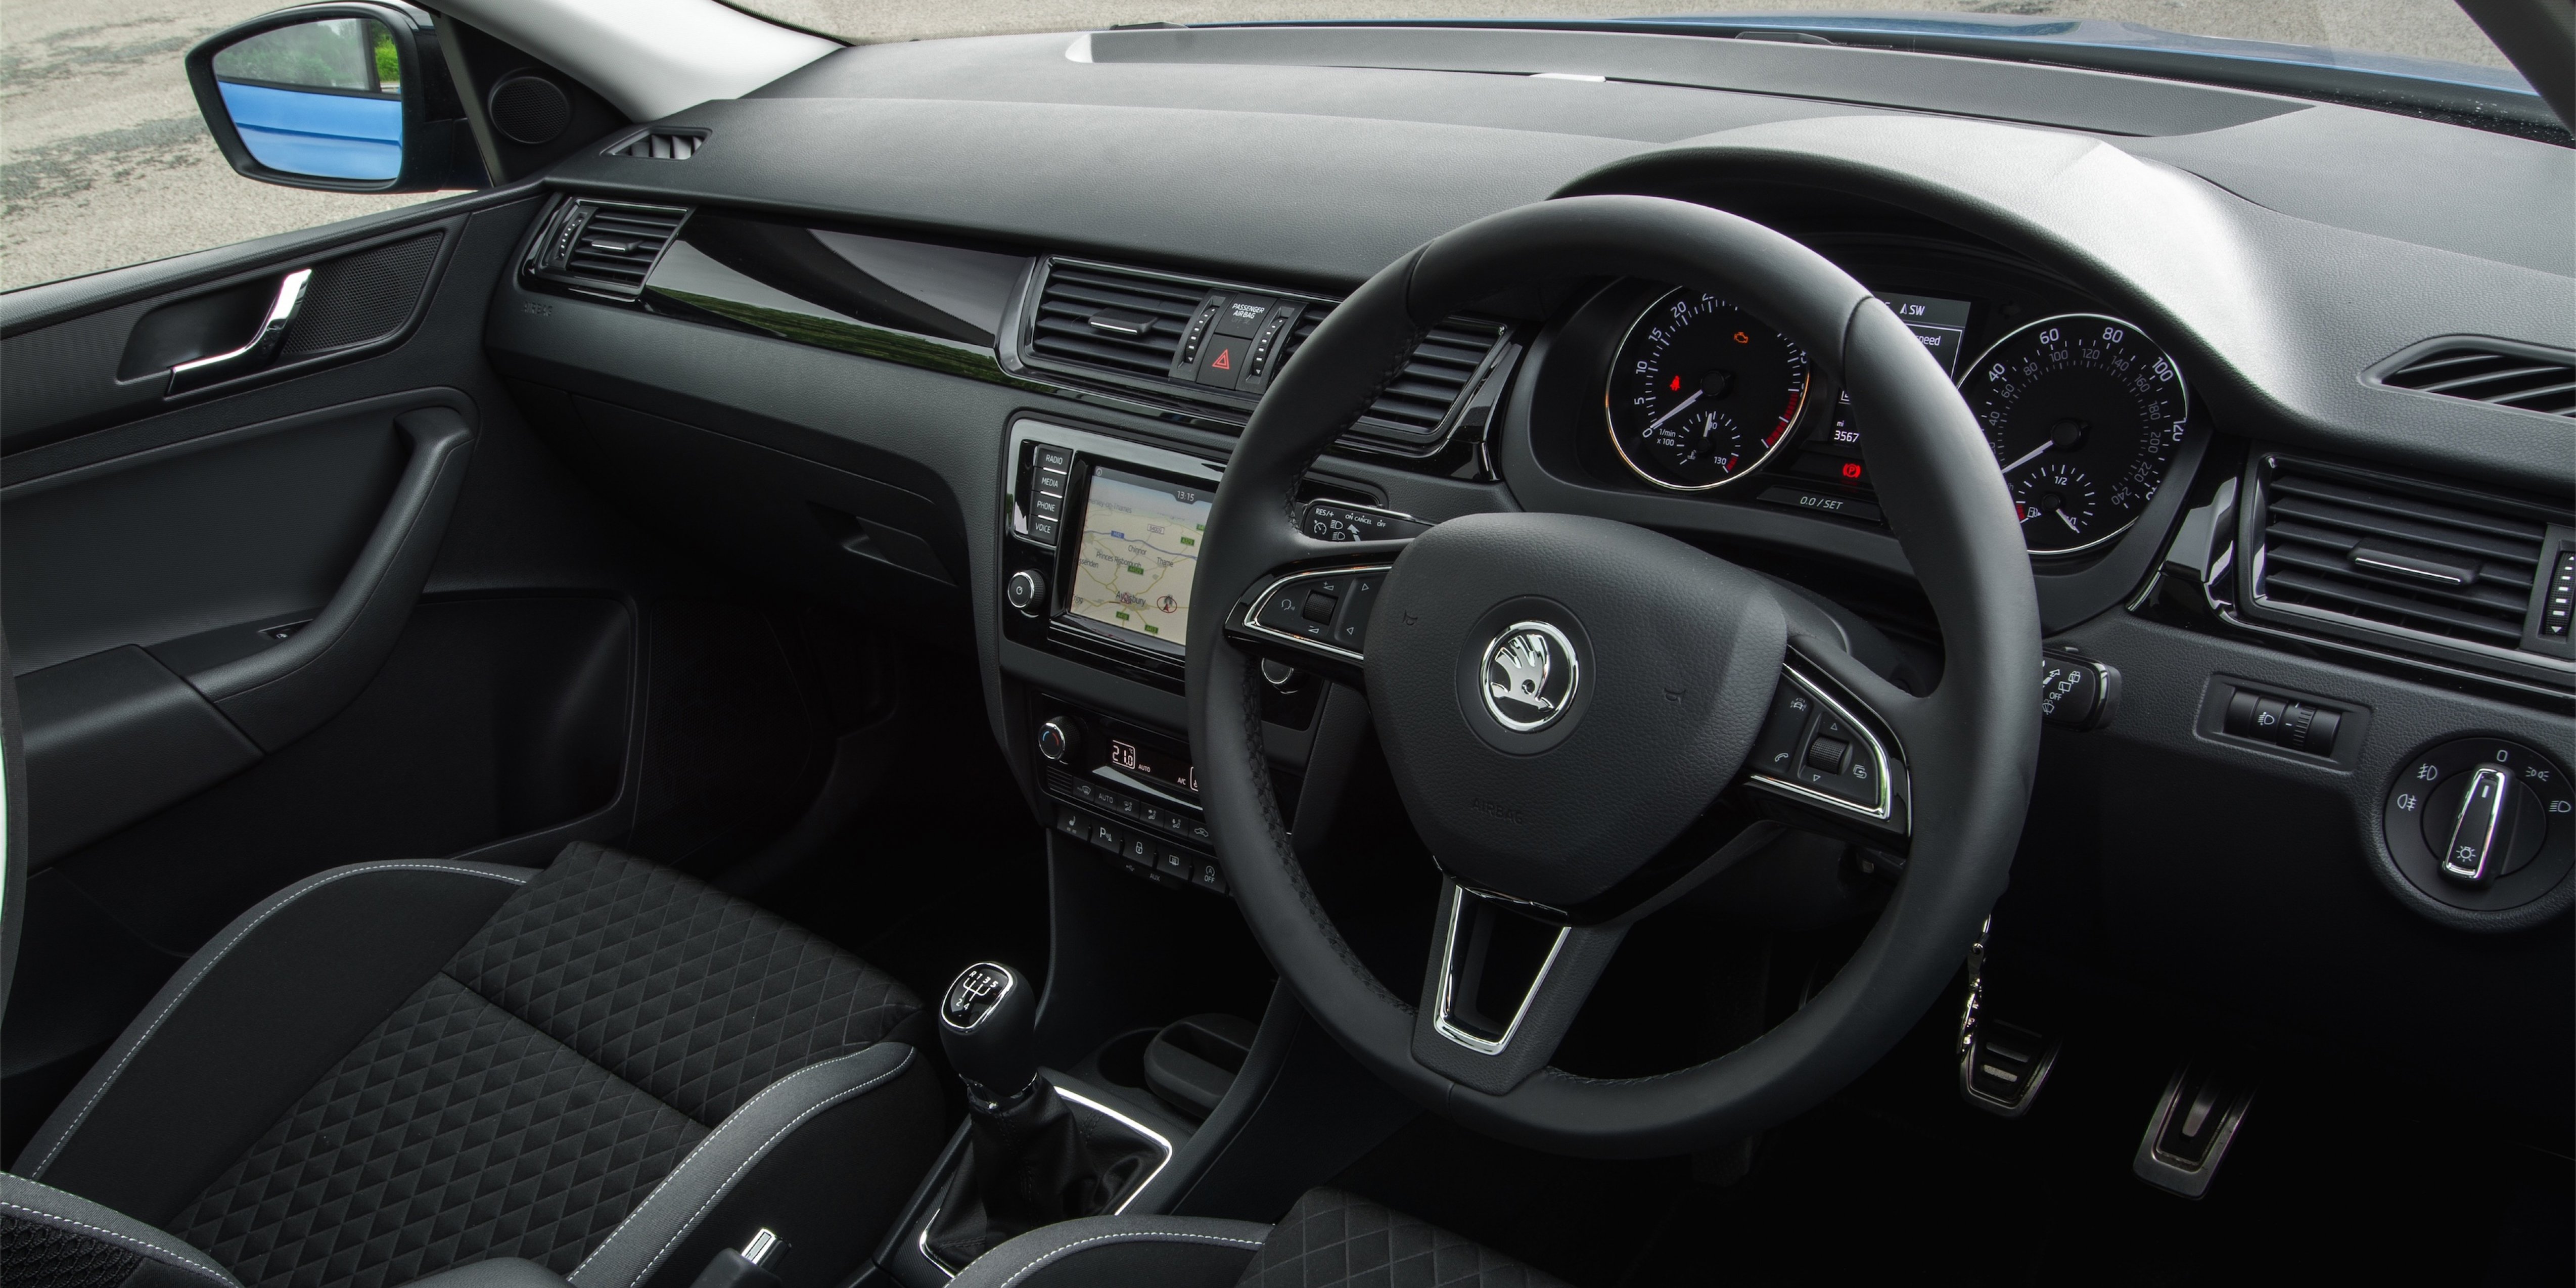 The Skoda's interior is dull but well built